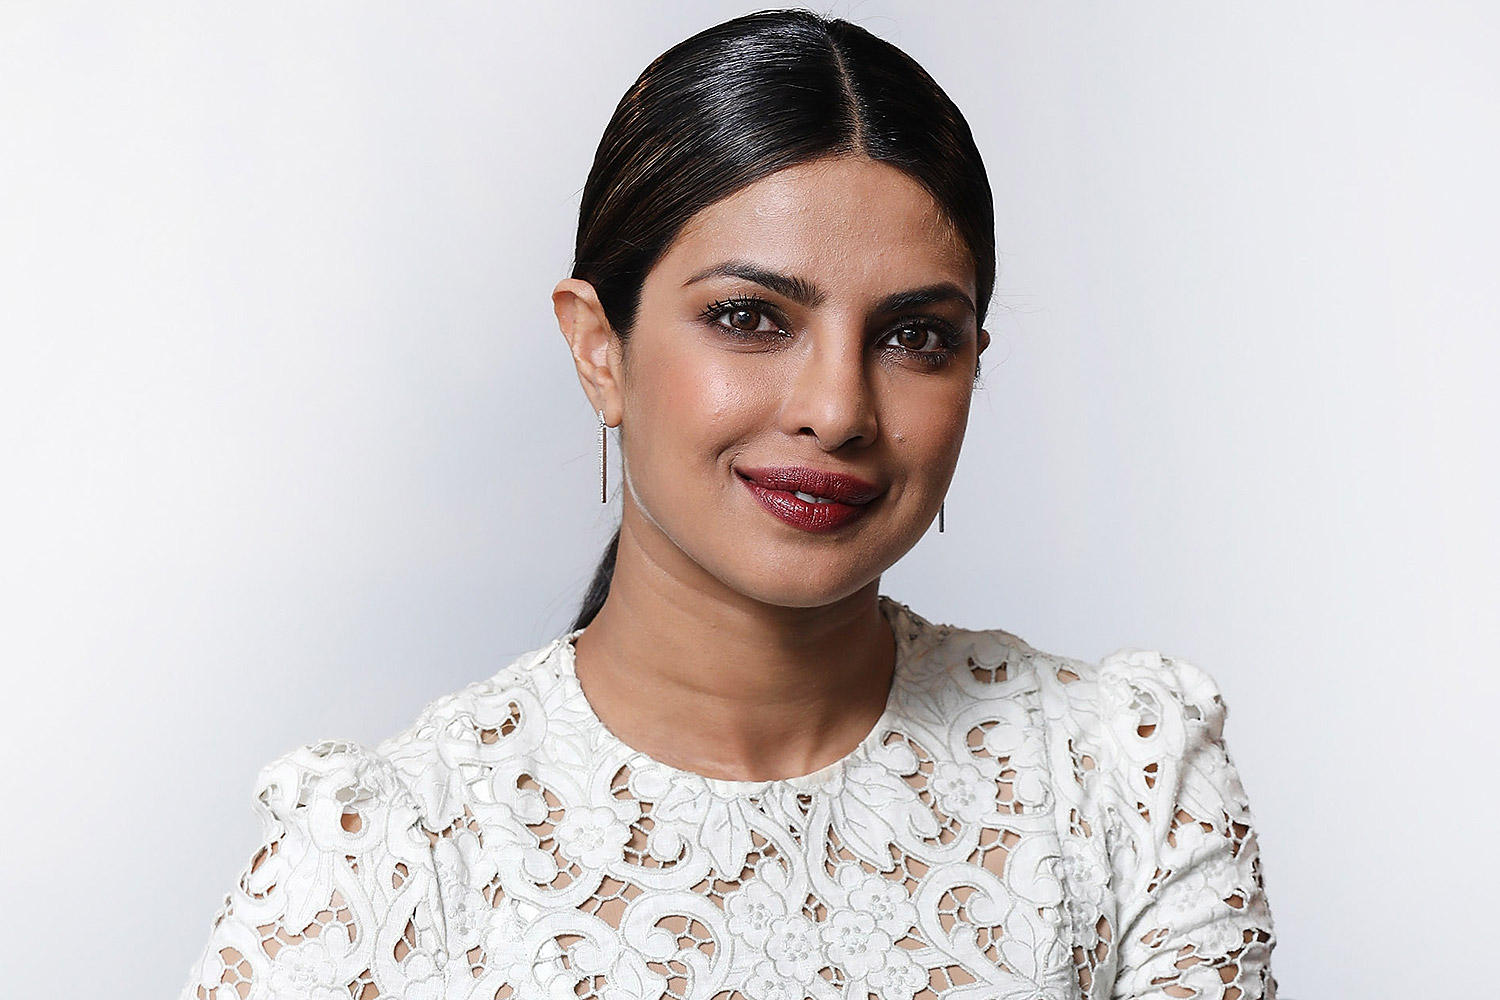 Priyanka Chopra works jointly with WHO to spread awareness over COVID-19_40.1